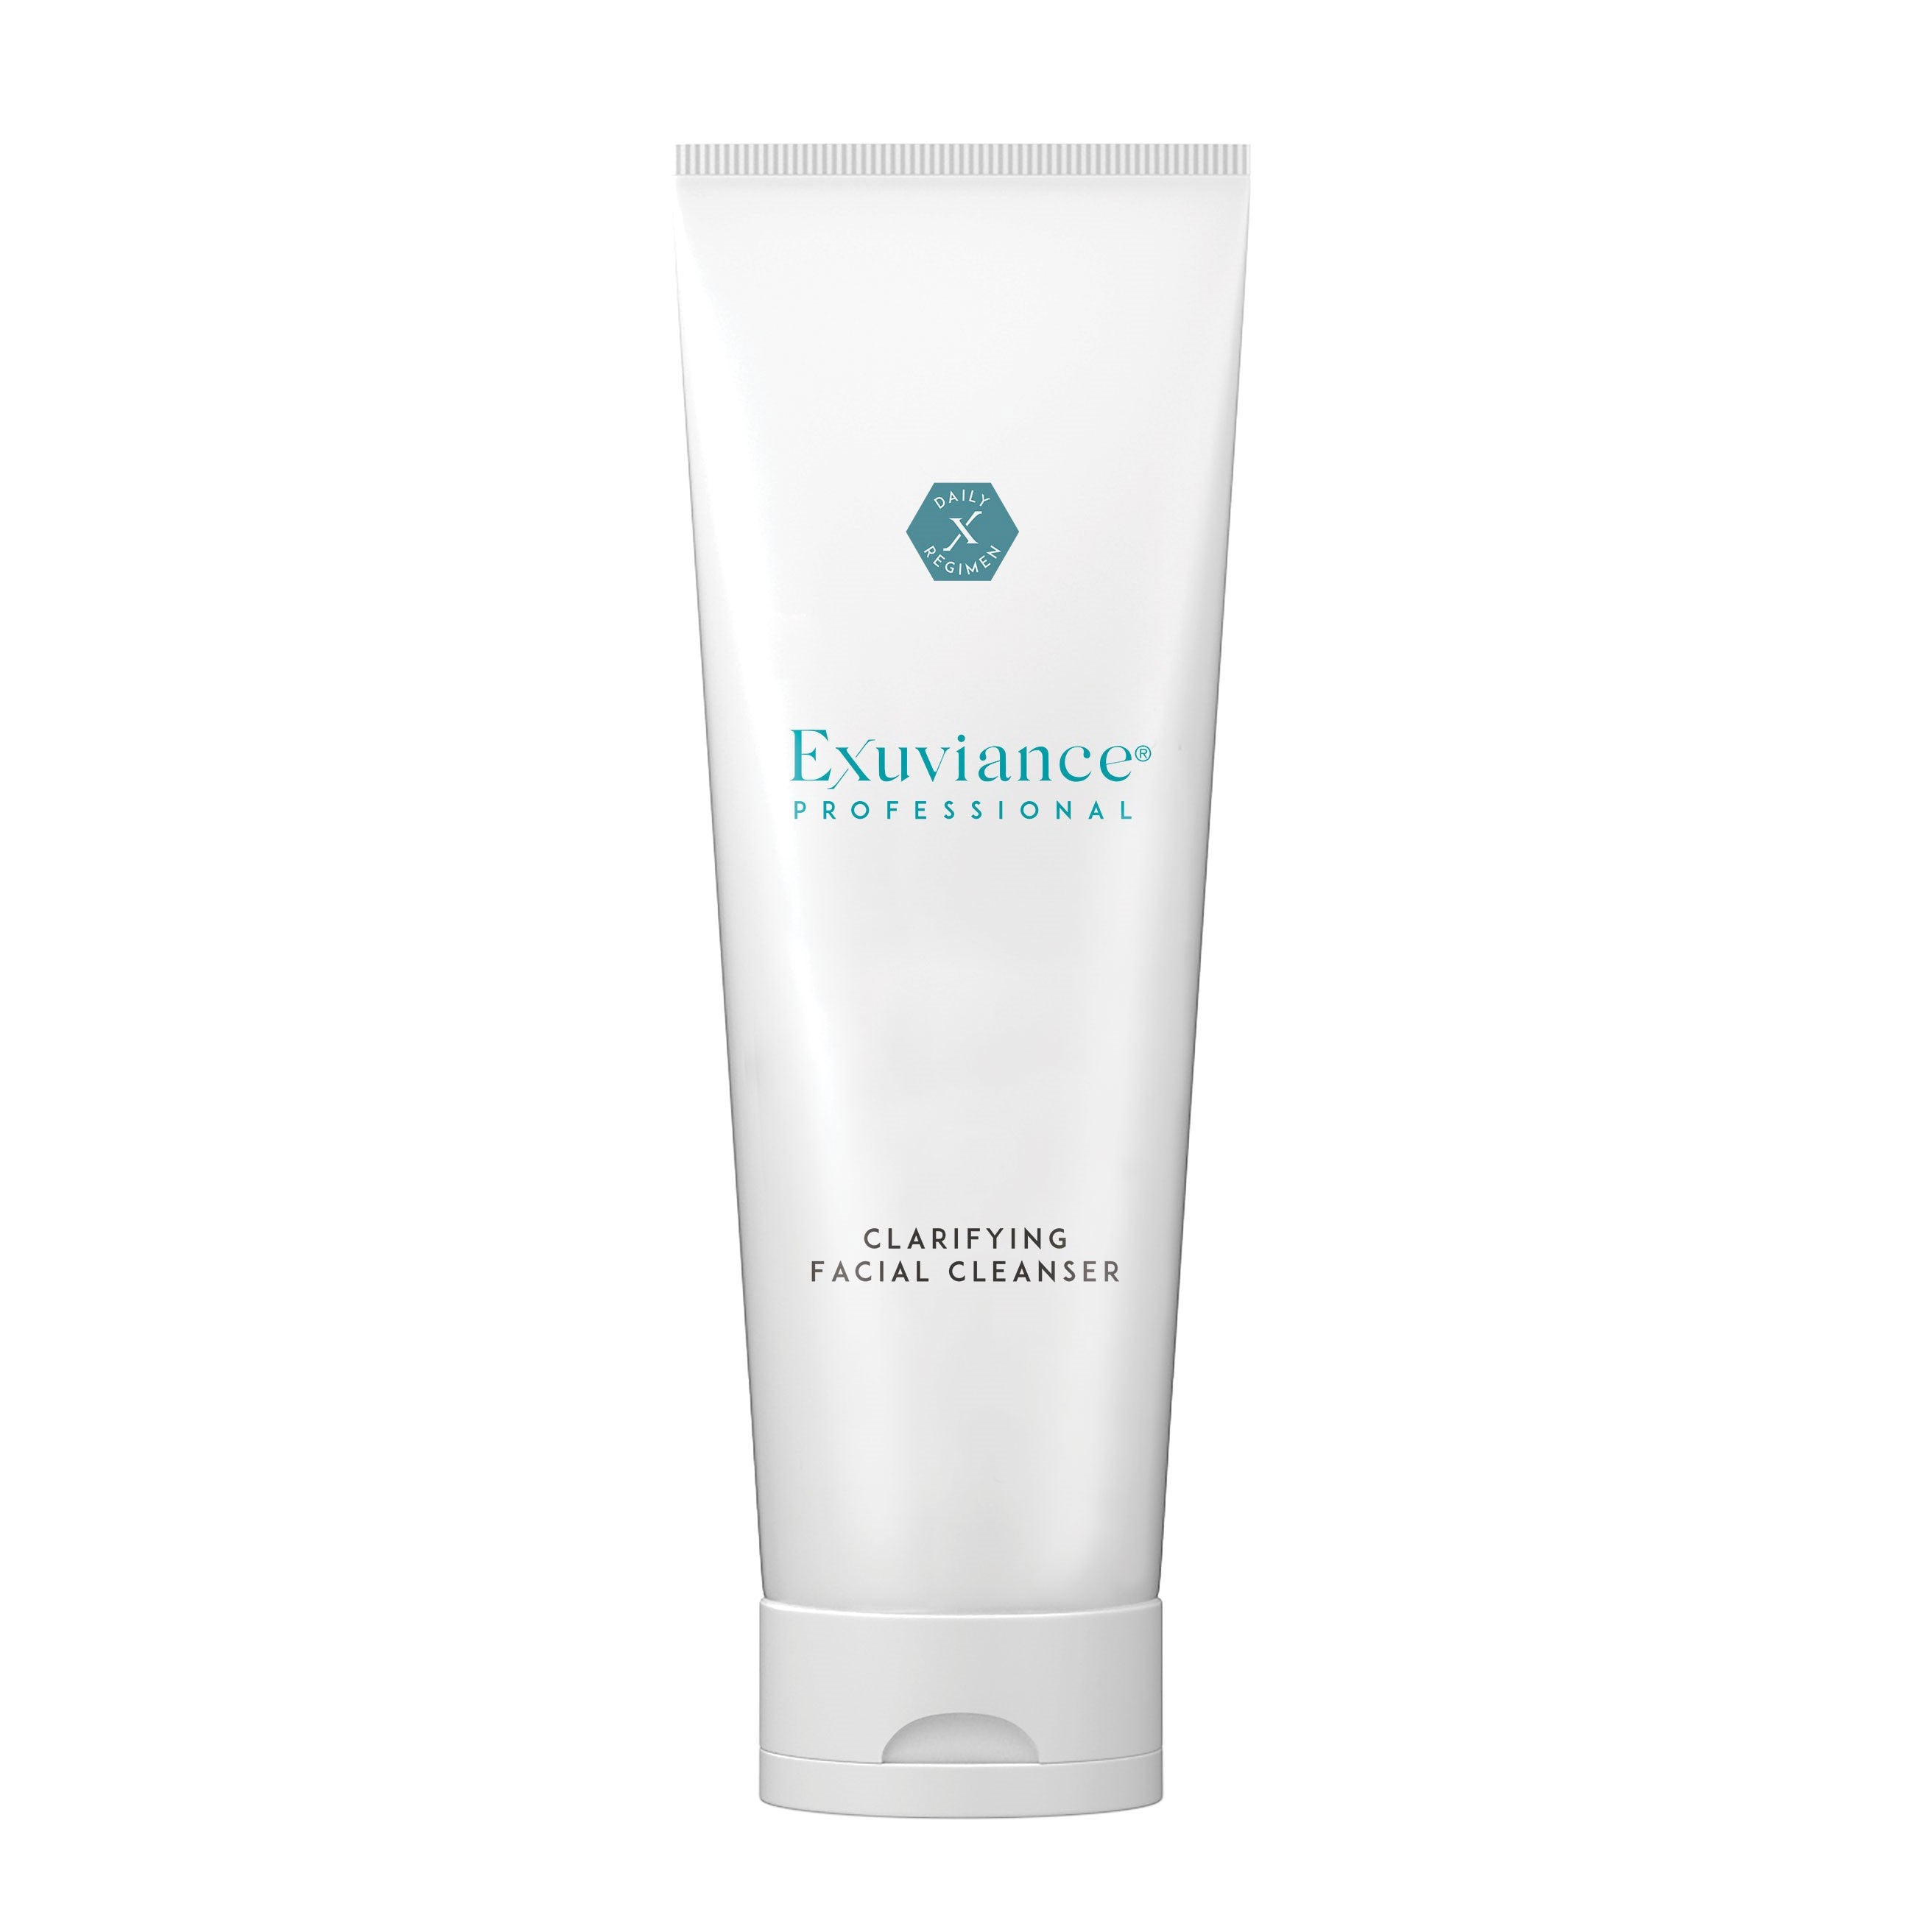 CLARIFYING FACIAL CLEANSER